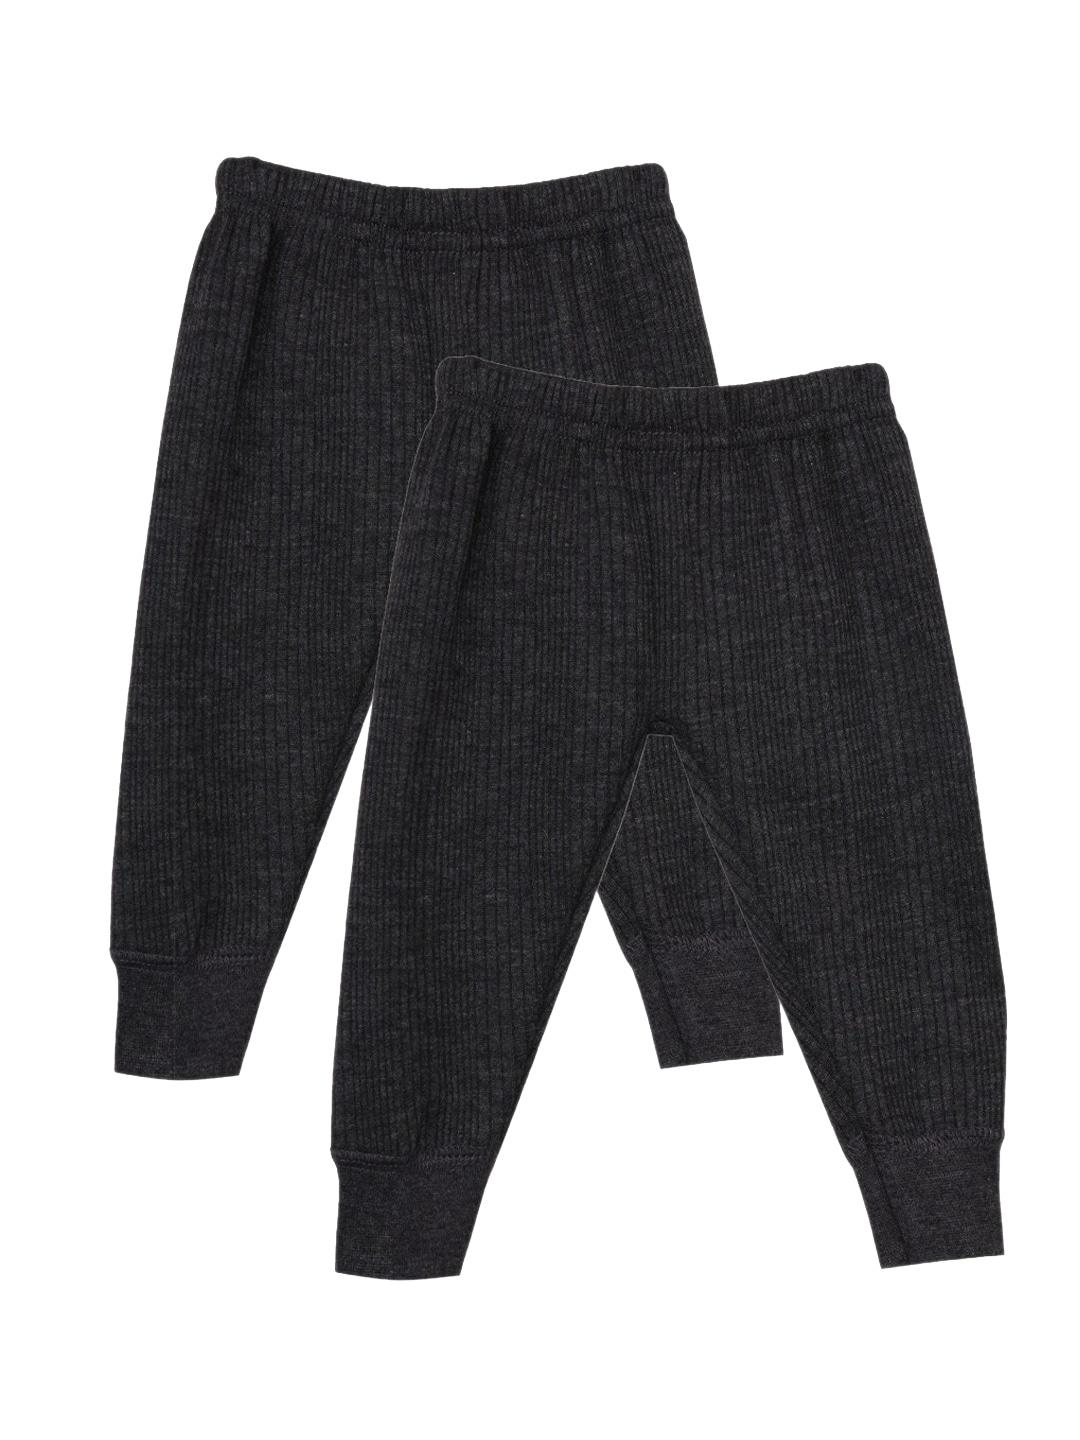 yk unisex kids pack of 2 charcoal grey solid thermal bottoms